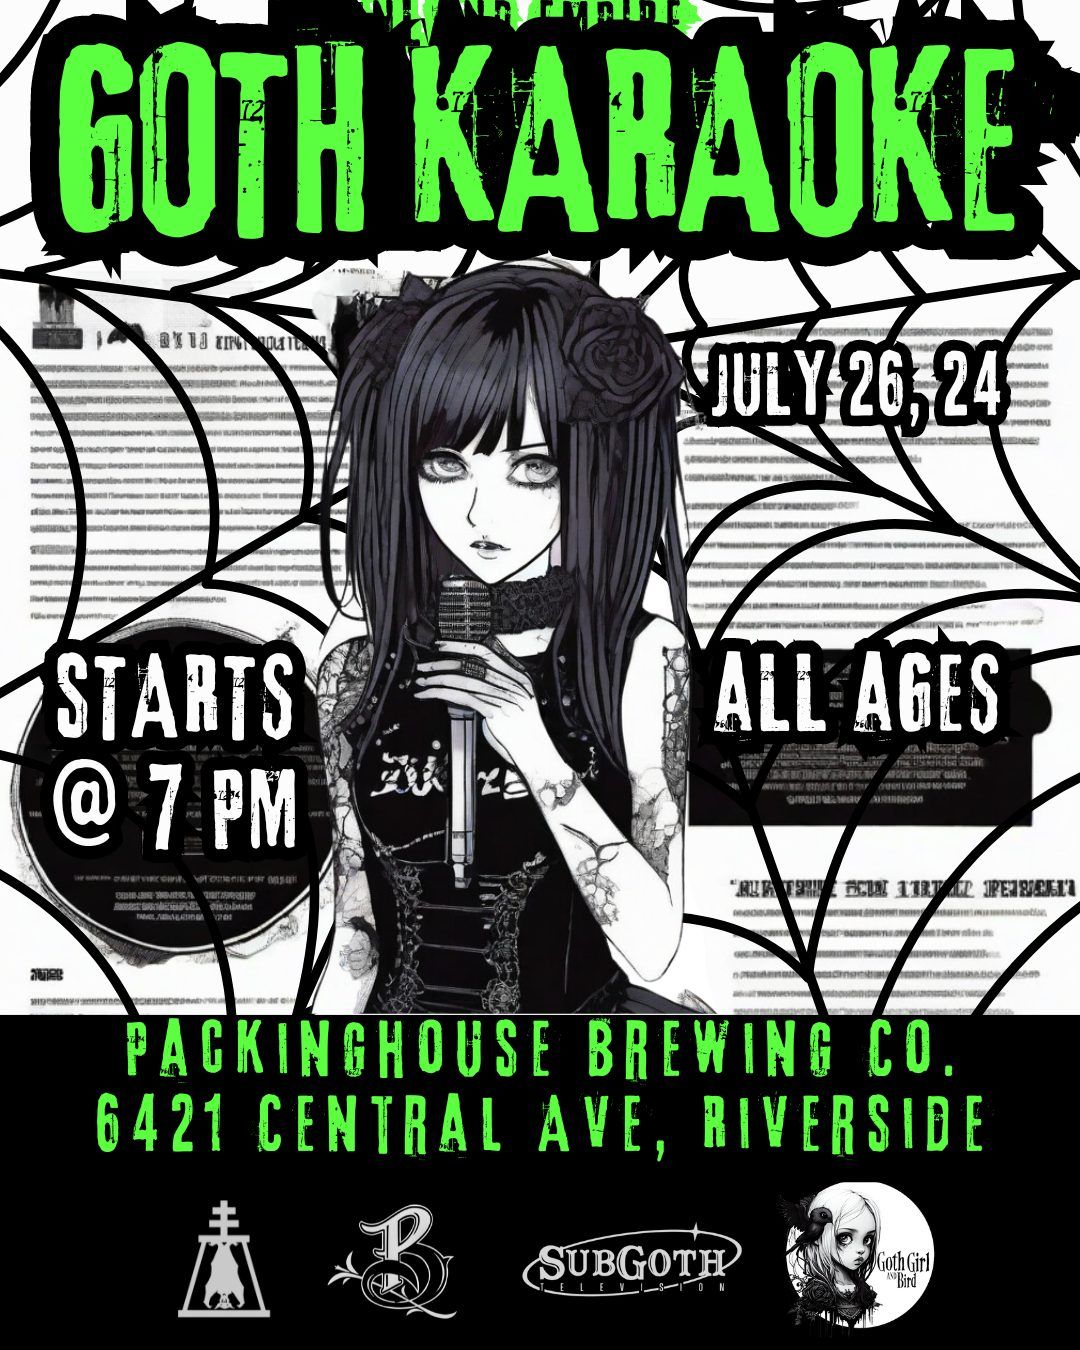 Inland Empire Goth Karaoke at Packinghouse Brewery!